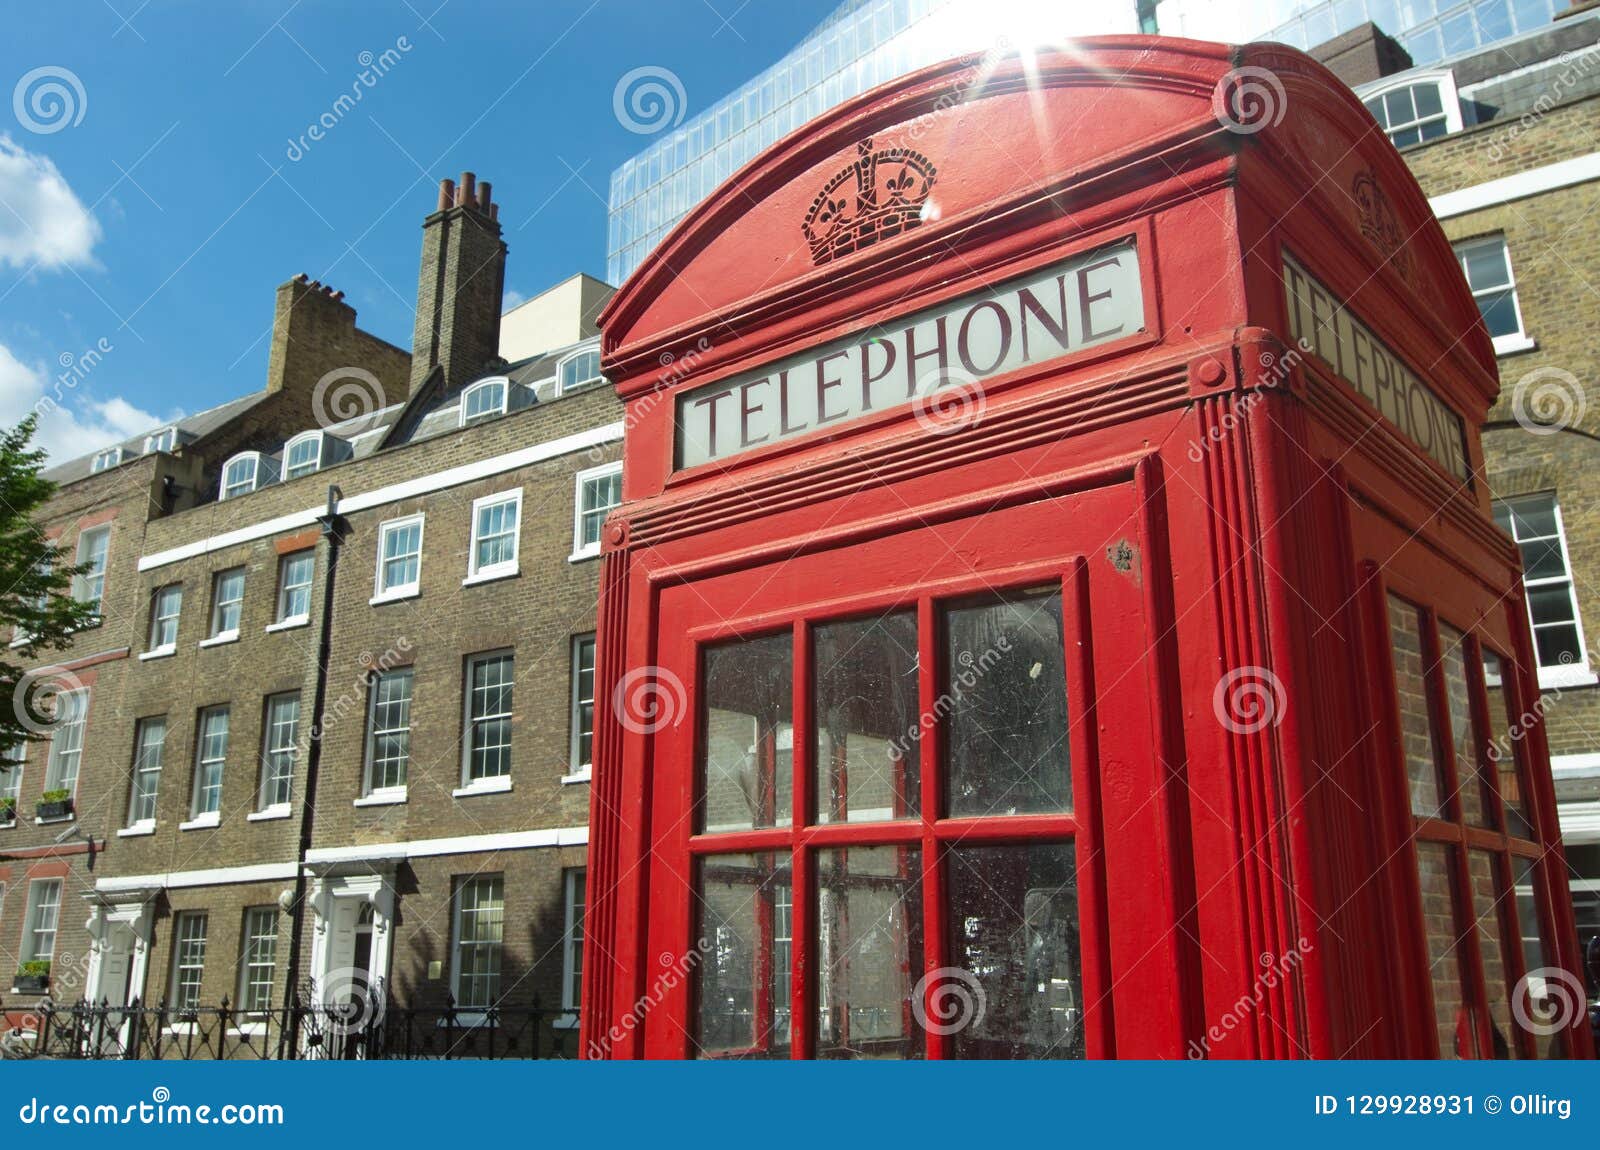 Red Phone Booth Old Style In London Stock Image Image of